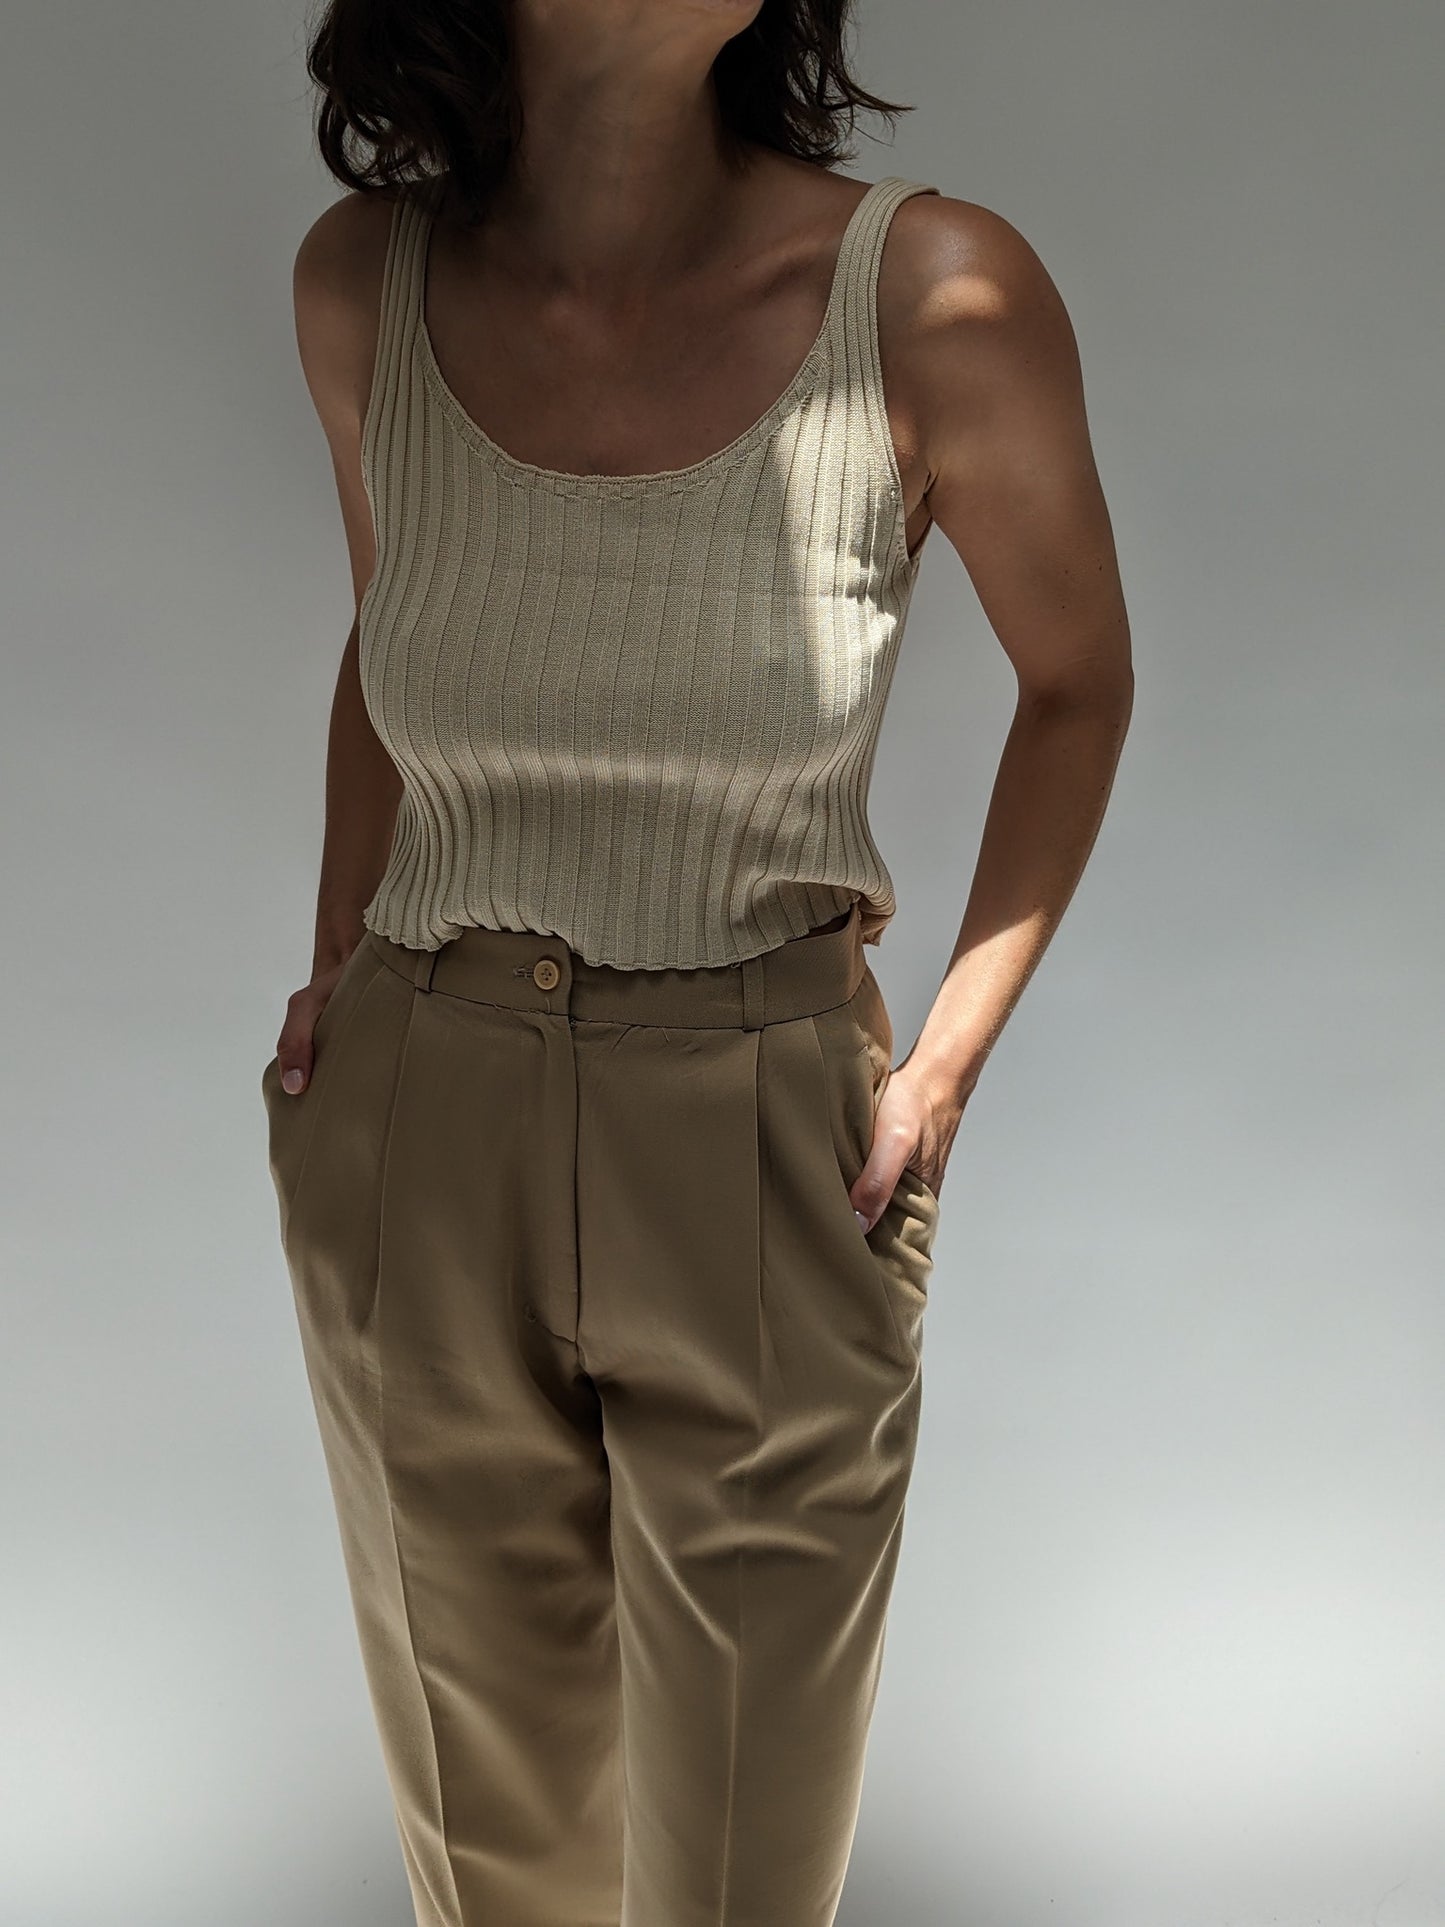 Vintage Camel Wool Twill Trousers